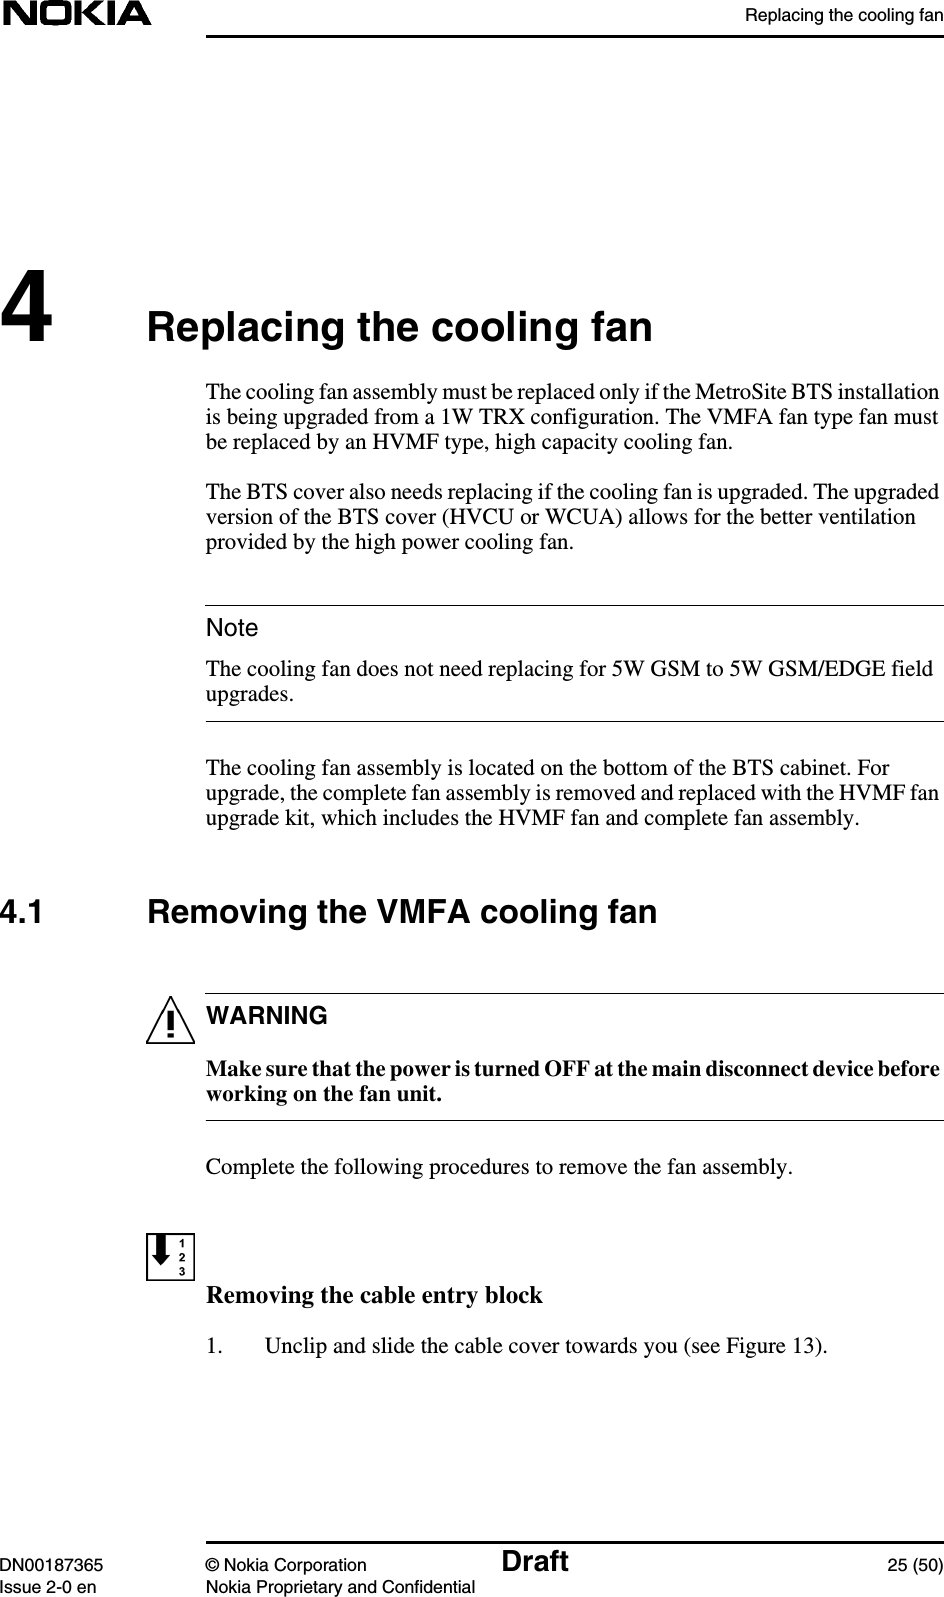 Replacing the cooling fanDN00187365 © Nokia Corporation Draft 25 (50)Issue 2-0 en Nokia Proprietary and ConfidentialNoteWARNING4Replacing the cooling fanThe cooling fan assembly must be replaced only if the MetroSite BTS installationis being upgraded from a 1W TRX configuration. The VMFA fan type fan mustbe replaced by an HVMF type, high capacity cooling fan.The BTS cover also needs replacing if the cooling fan is upgraded. The upgradedversion of the BTS cover (HVCU or WCUA) allows for the better ventilationprovided by the high power cooling fan.The cooling fan does not need replacing for 5W GSM to 5W GSM/EDGE fieldupgrades.The cooling fan assembly is located on the bottom of the BTS cabinet. Forupgrade, the complete fan assembly is removed and replaced with the HVMF fanupgrade kit, which includes the HVMF fan and complete fan assembly.4.1 Removing the VMFA cooling fanMake sure that the power is turned OFF at the main disconnect device beforeworking on the fan unit.Complete the following procedures to remove the fan assembly.Removing the cable entry block1. Unclip and slide the cable cover towards you (see Figure 13).